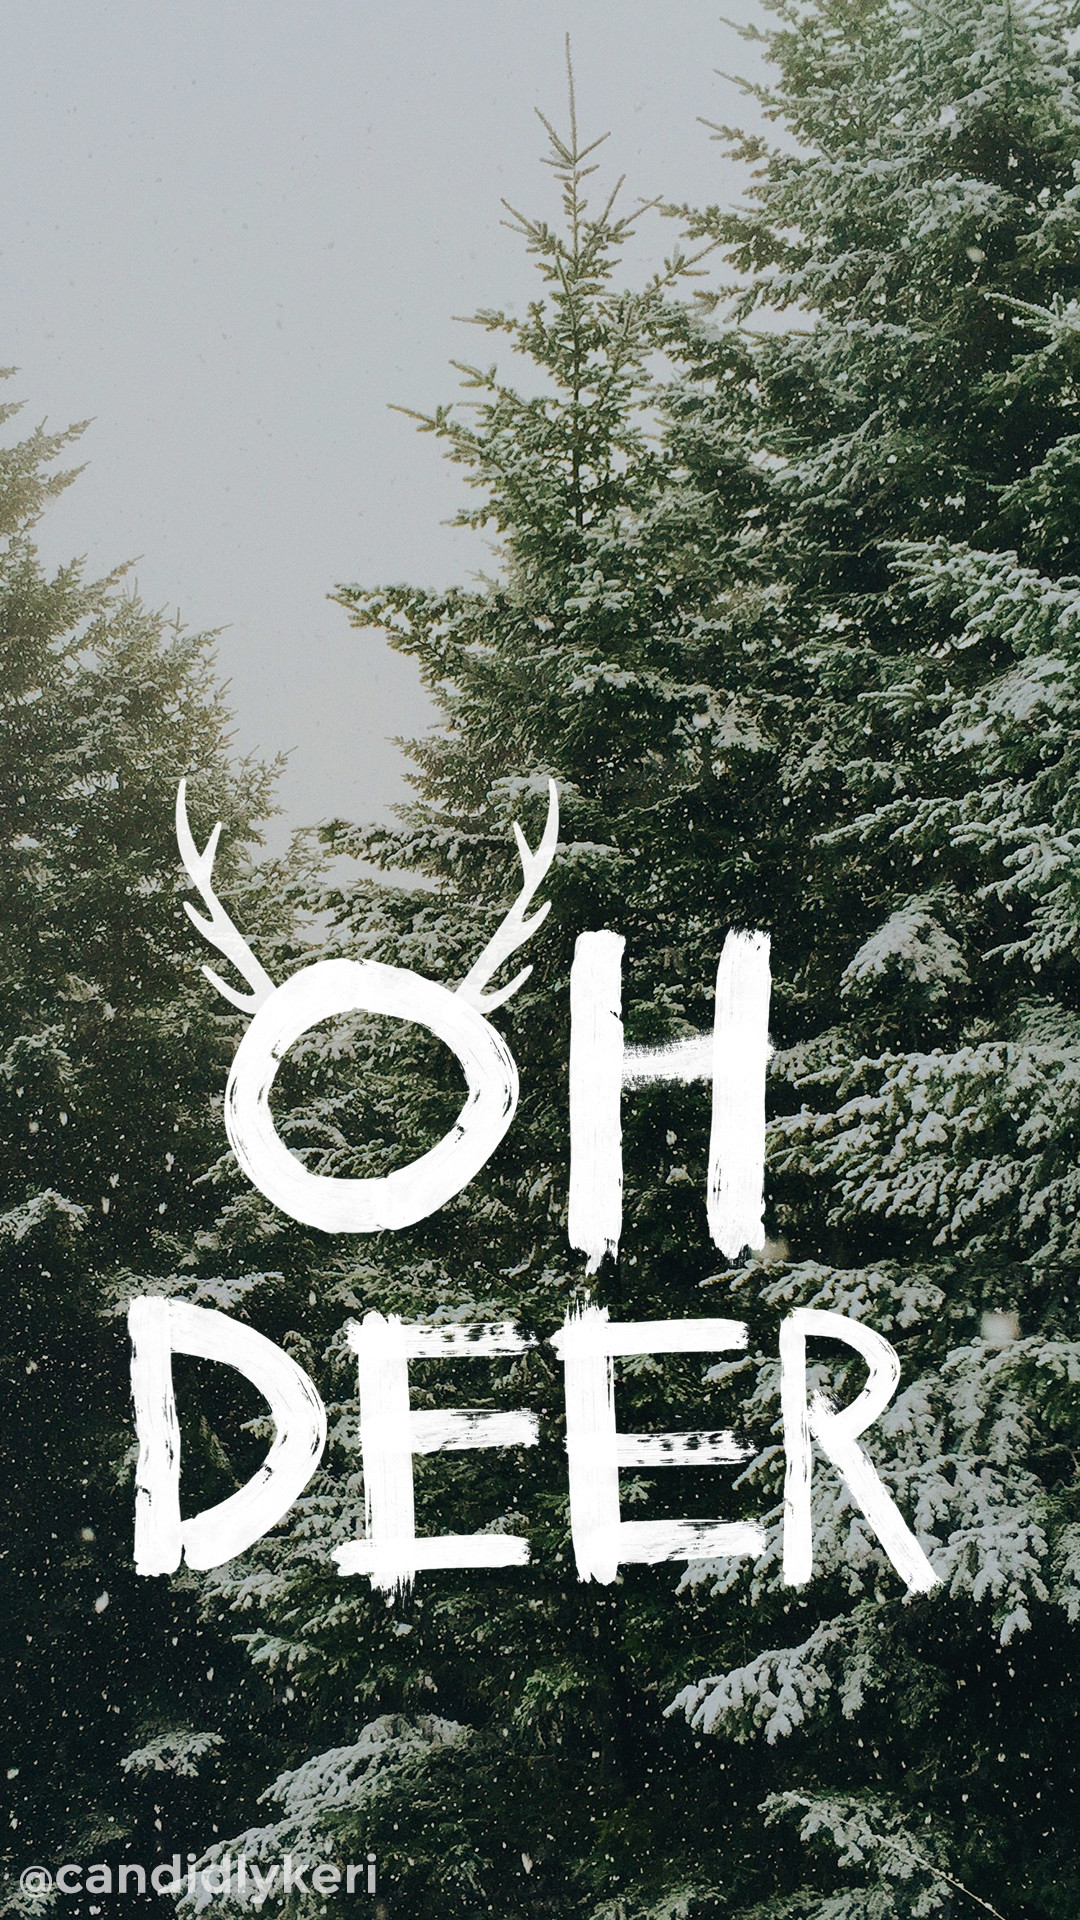 Oh Deer snowy trees Christmas tree cute background wallpaper you can  download for free on the